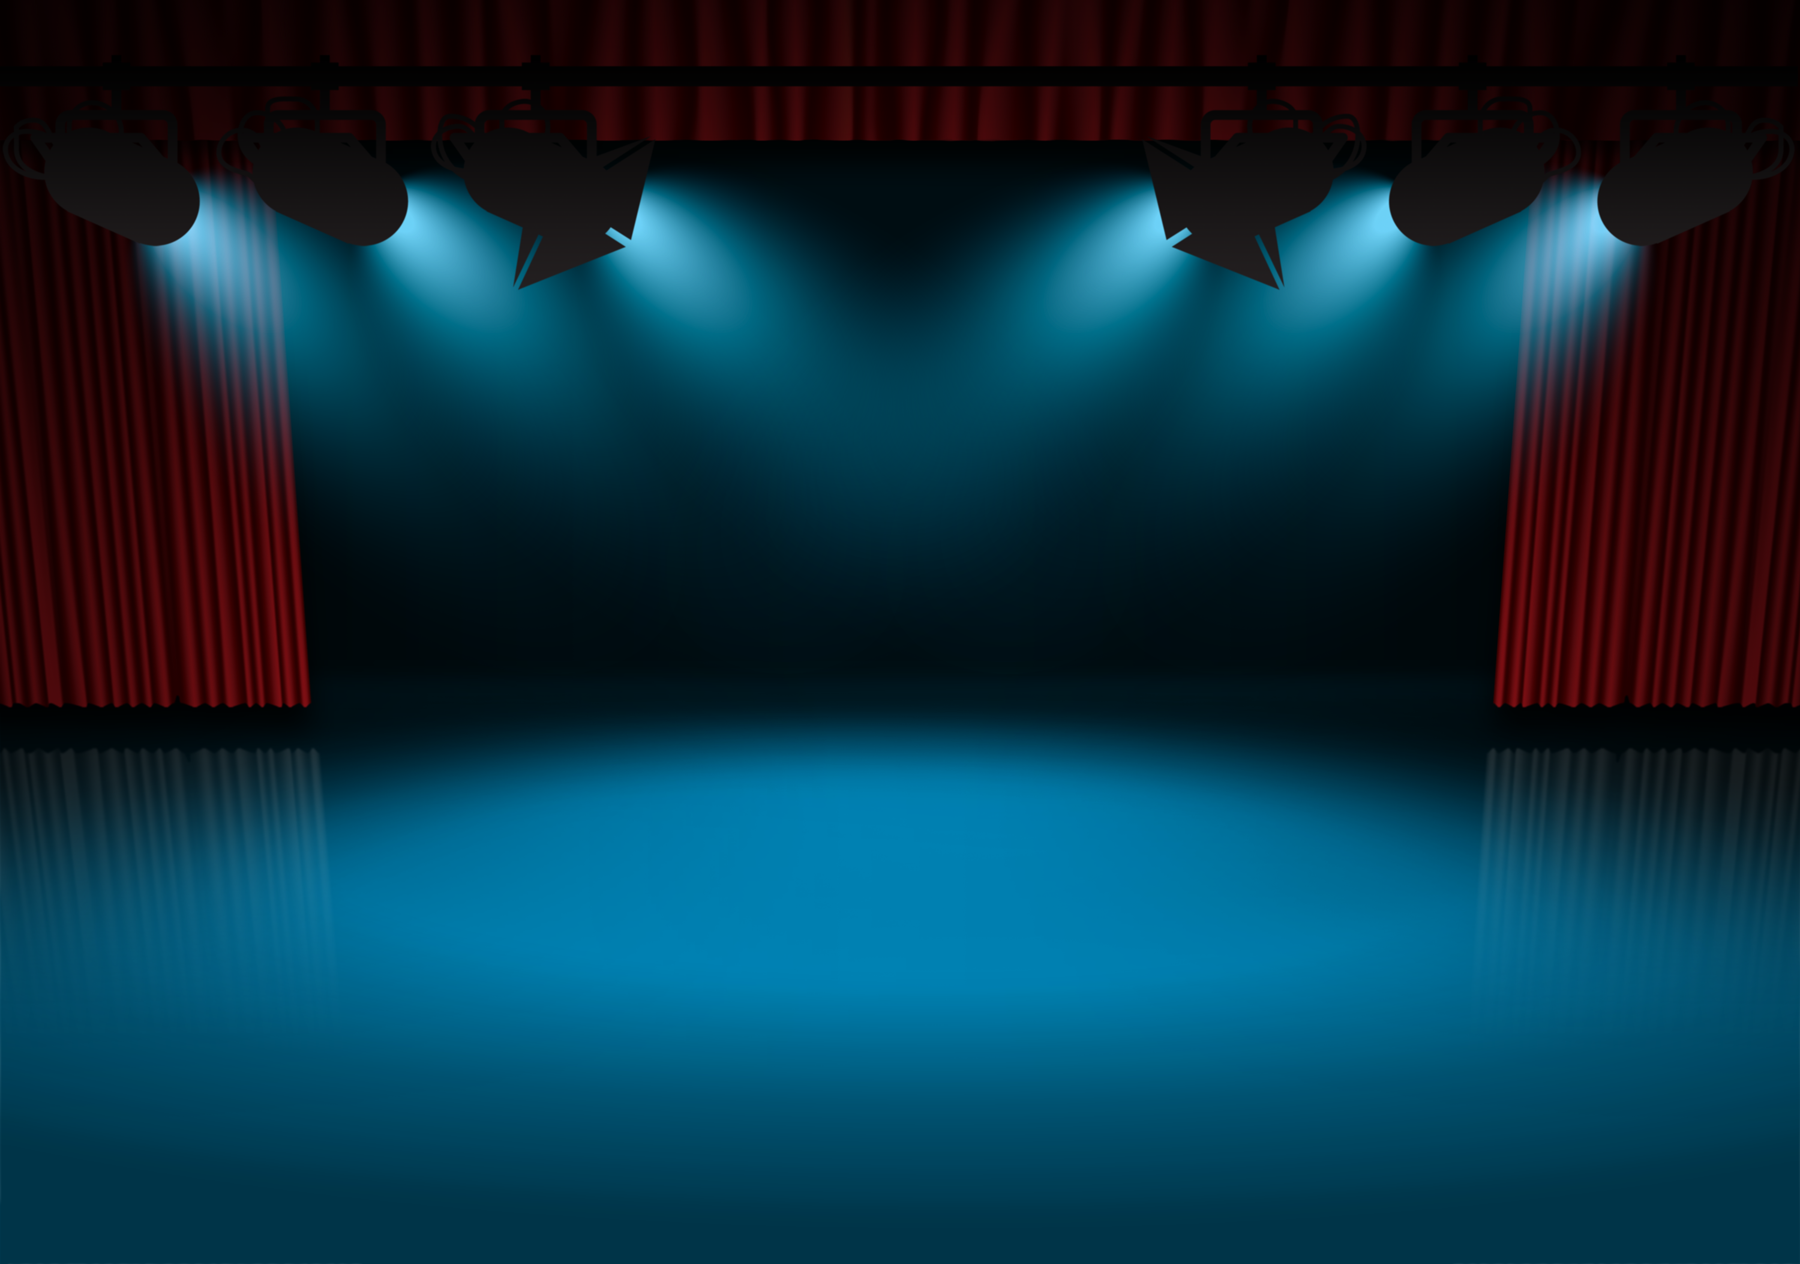 Stage Background Images   Wallpaper Cave